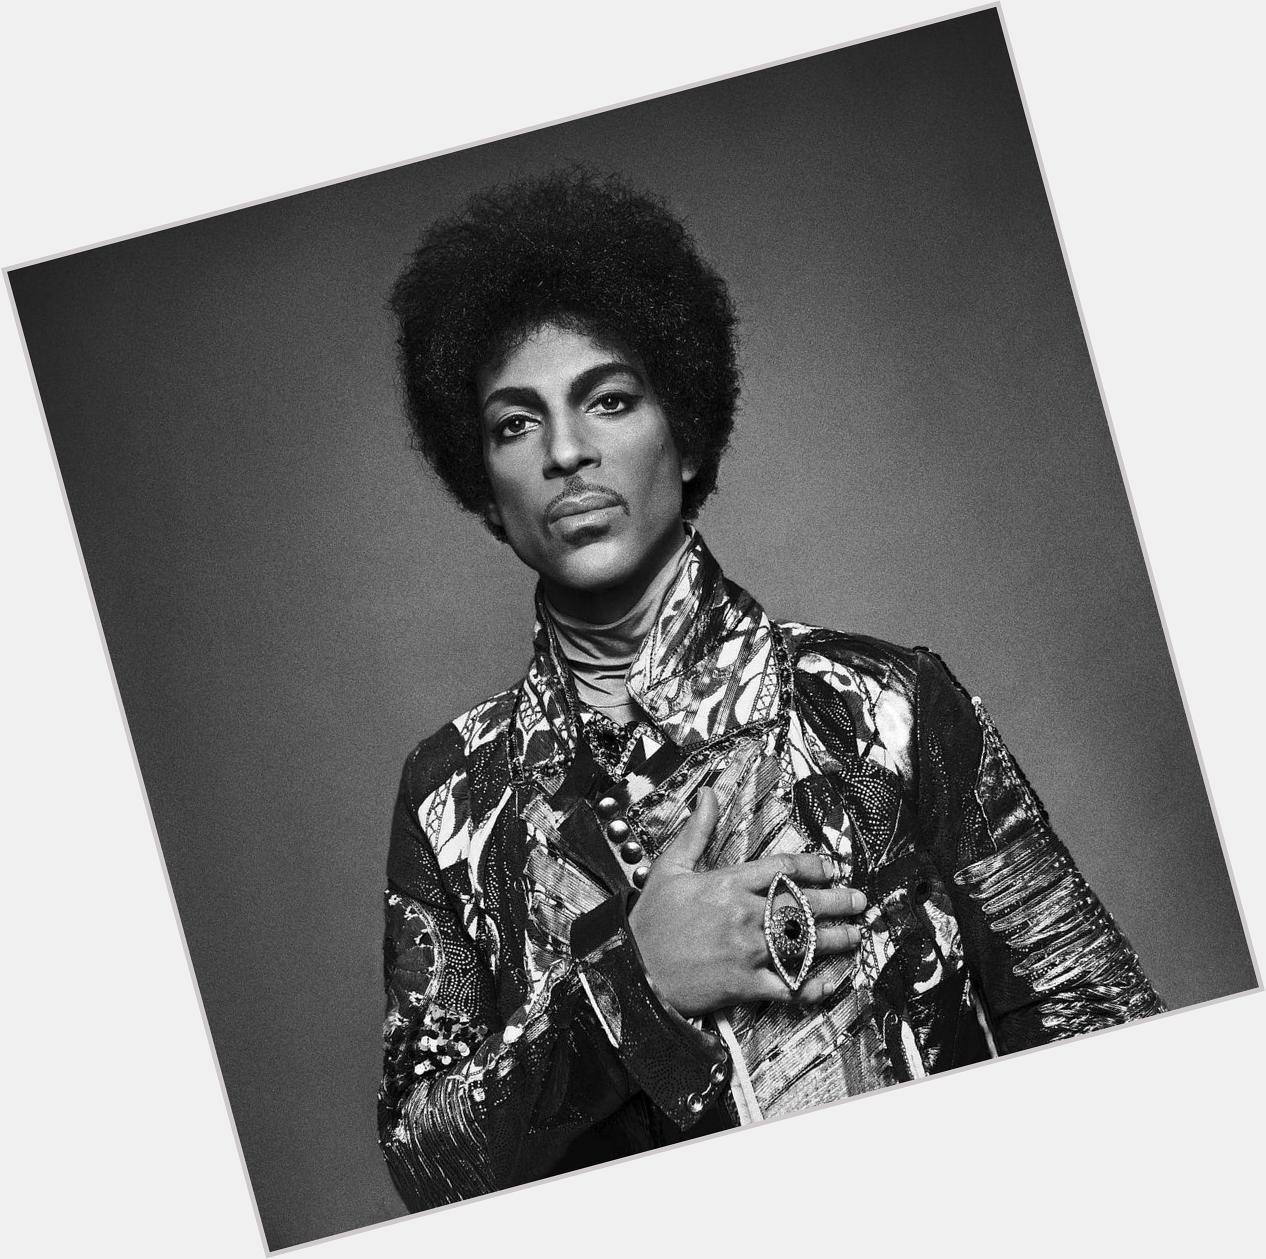                                      57          Happy 57th birthday, Artist (formerly known as Prince)! 